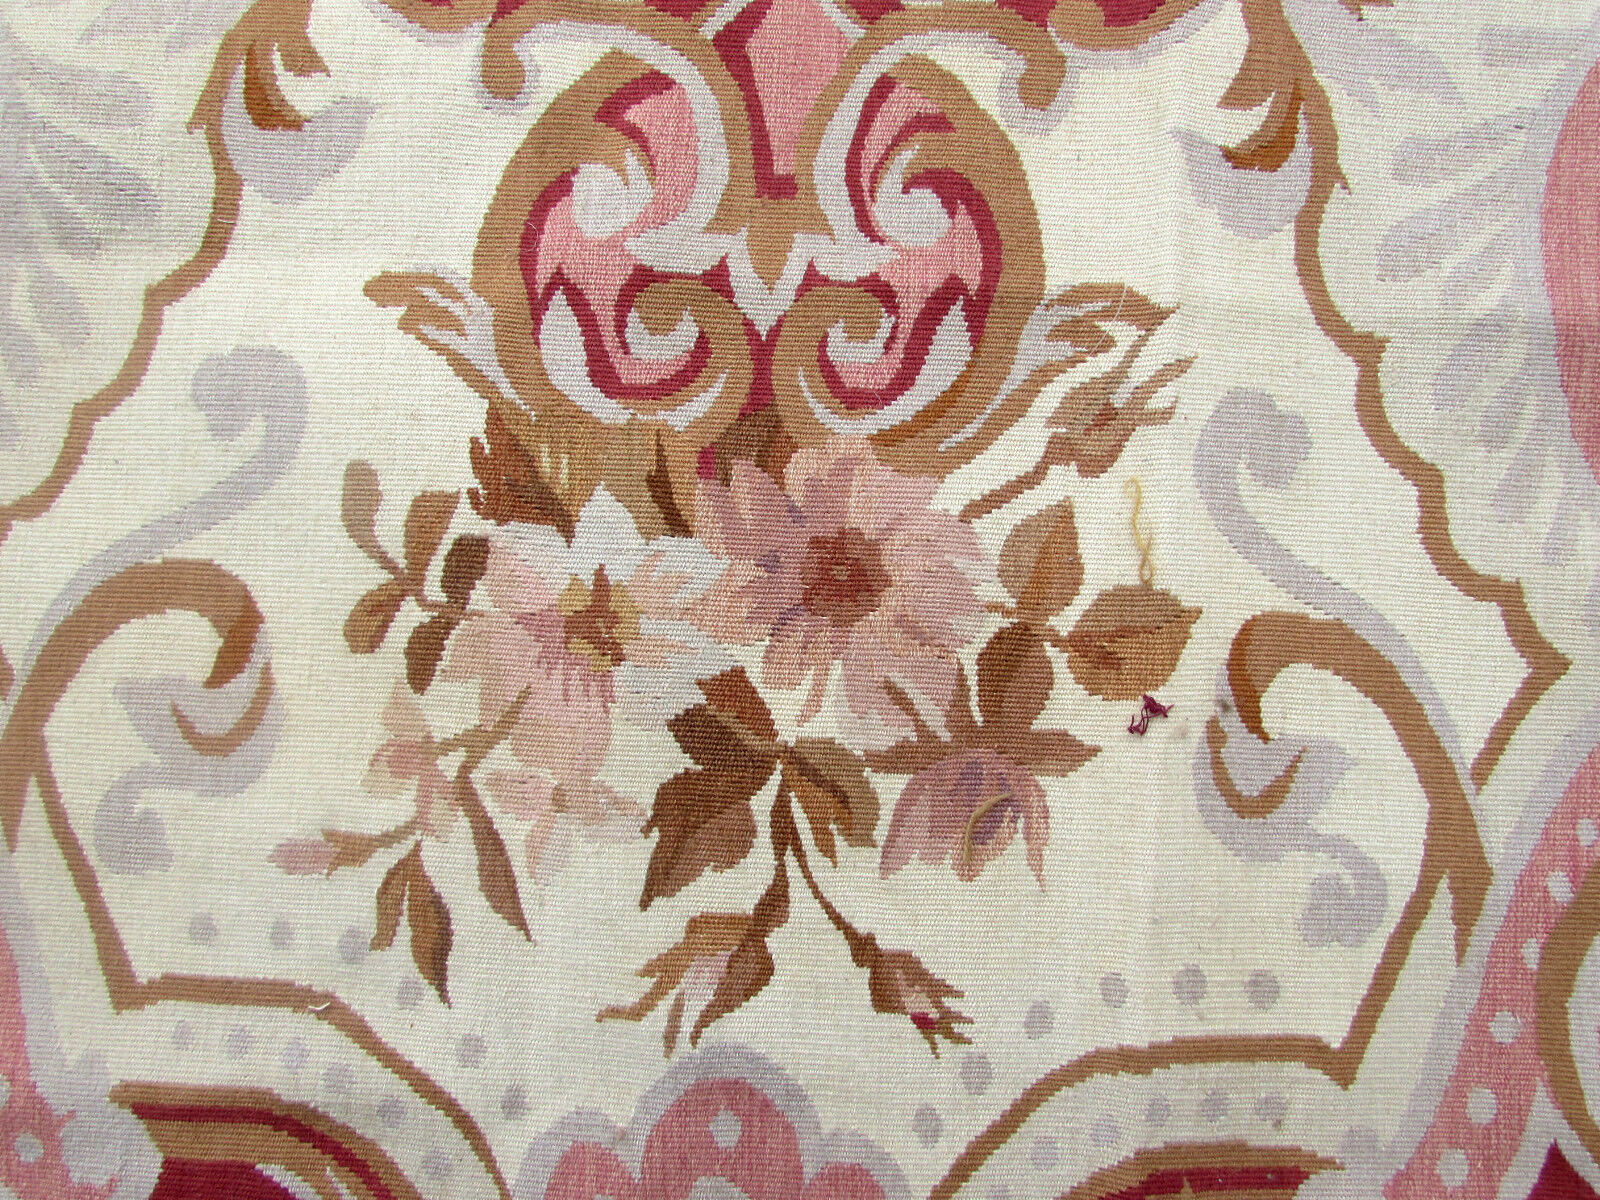 Beautifully woven details on the French Aubusson Rug